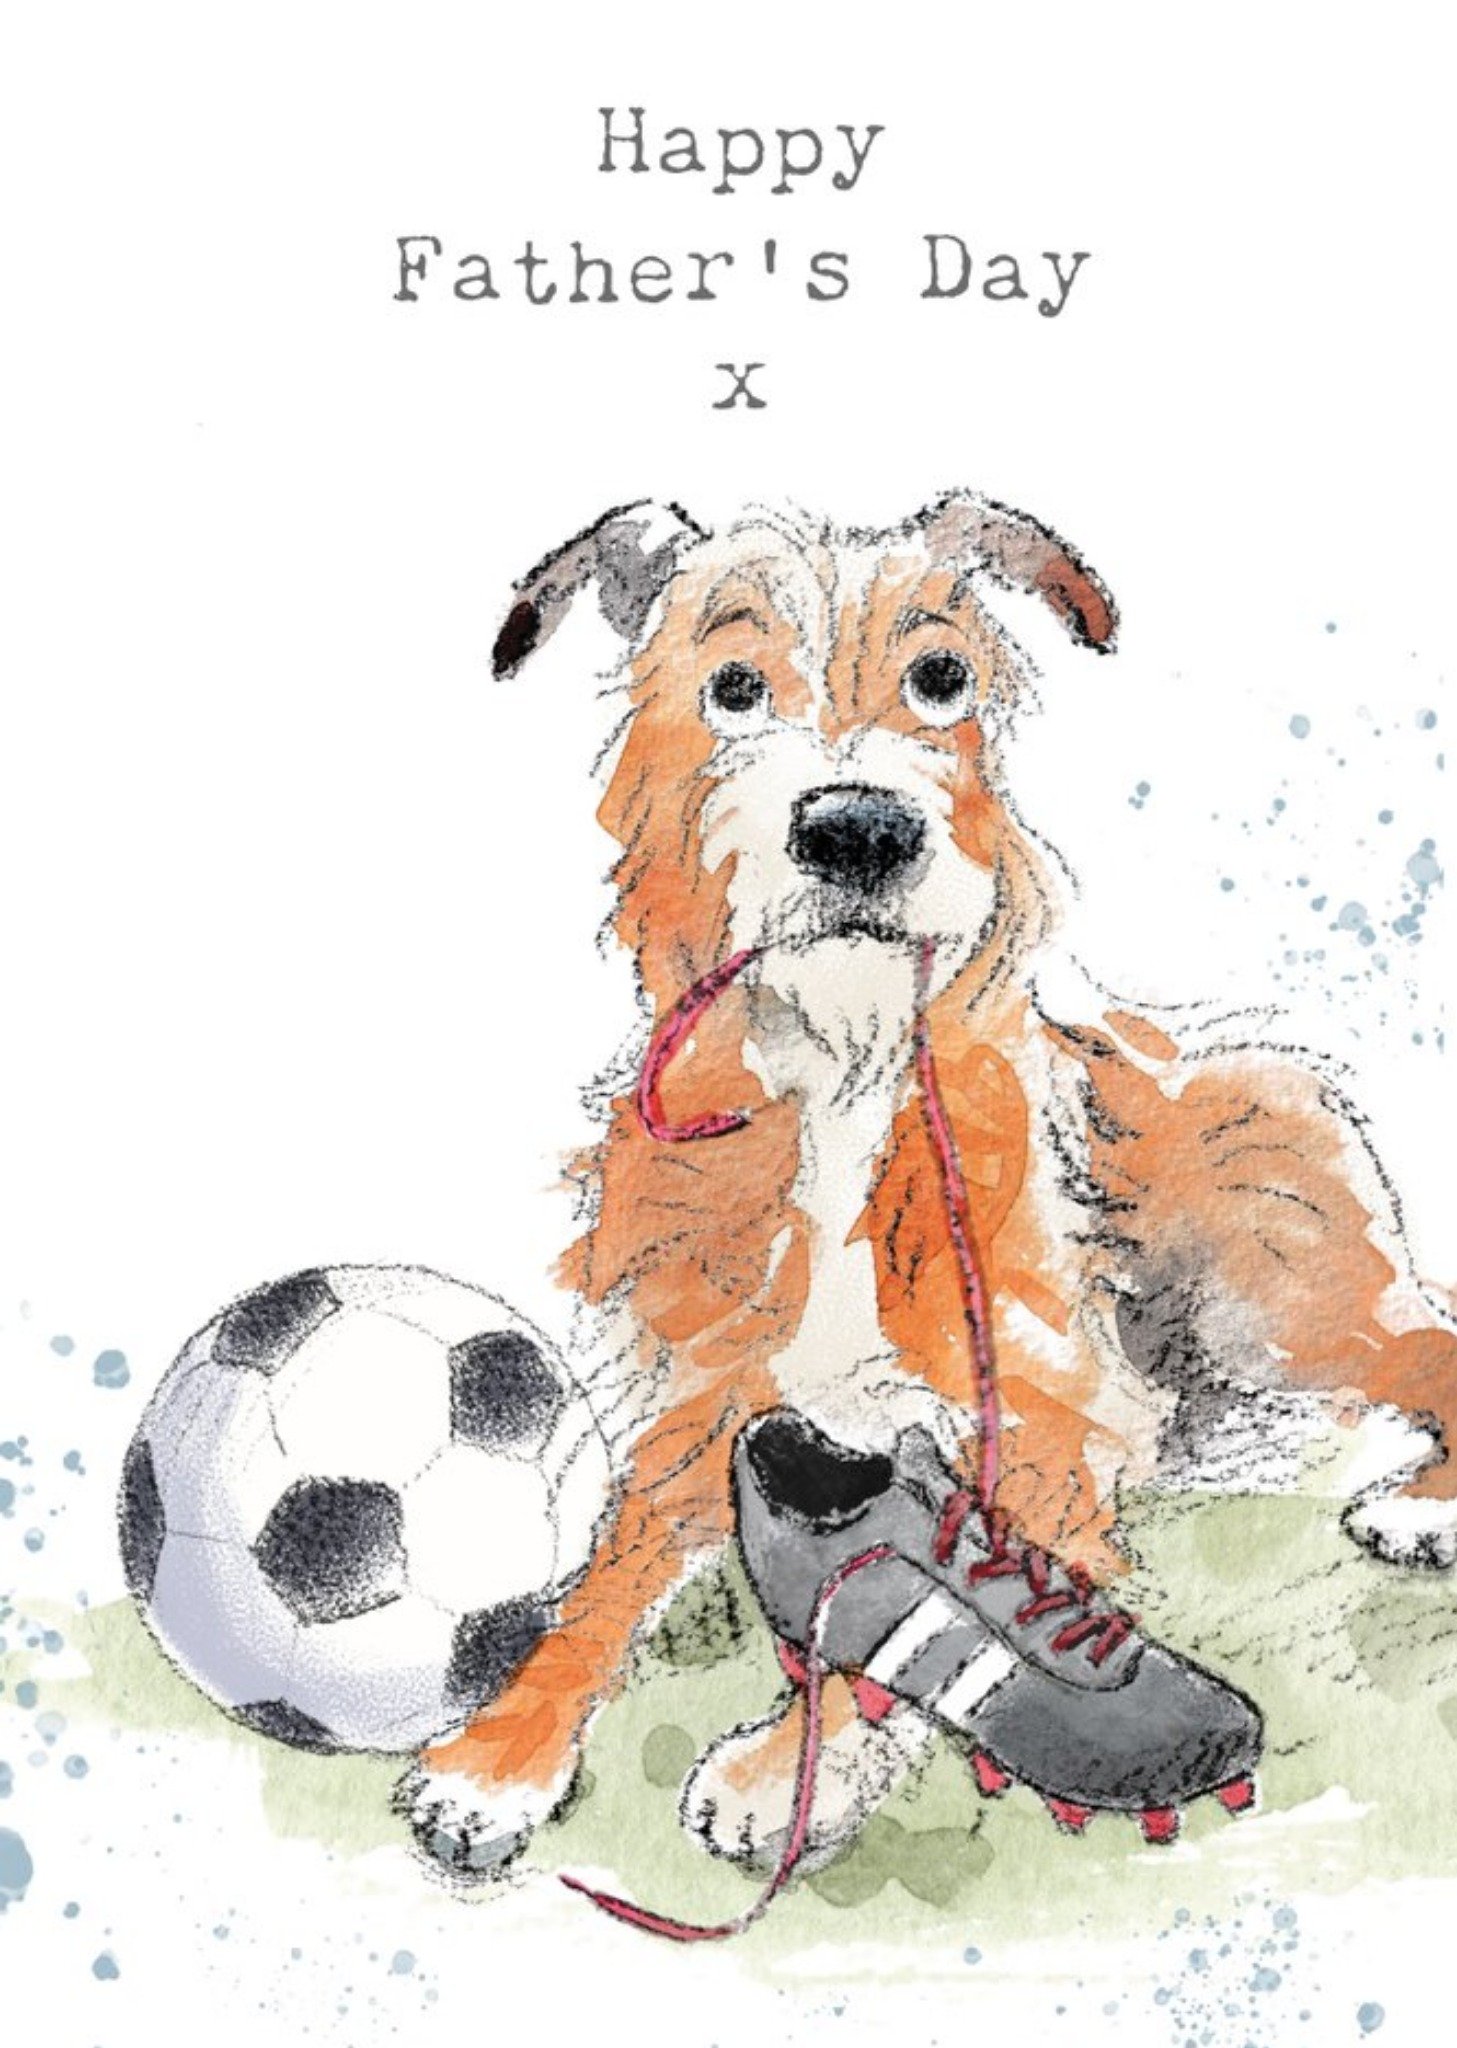 Moonpig Illustration Of A Cute Dog With A Football And A Boot Father's Day Card Ecard